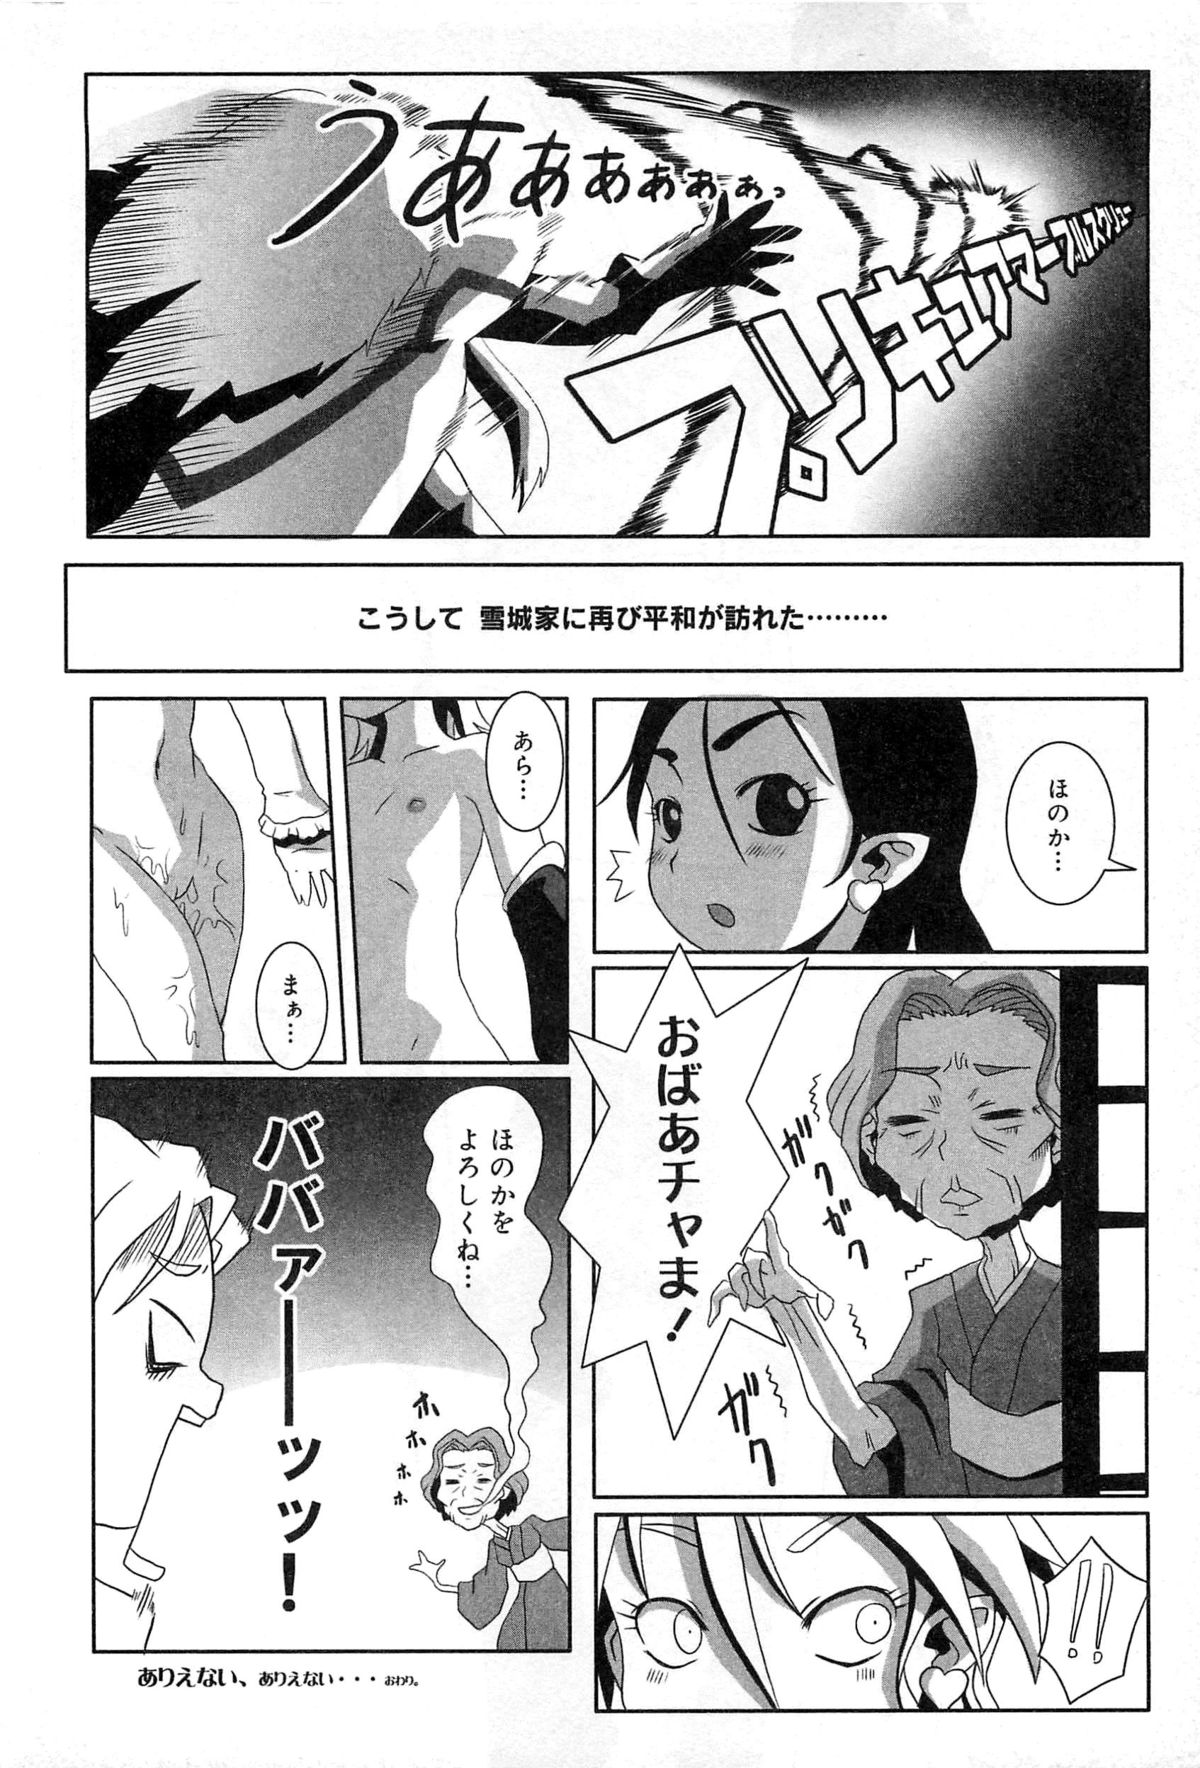 [Anthology] Cure Cure Battle Precure Eroparo page 27 full